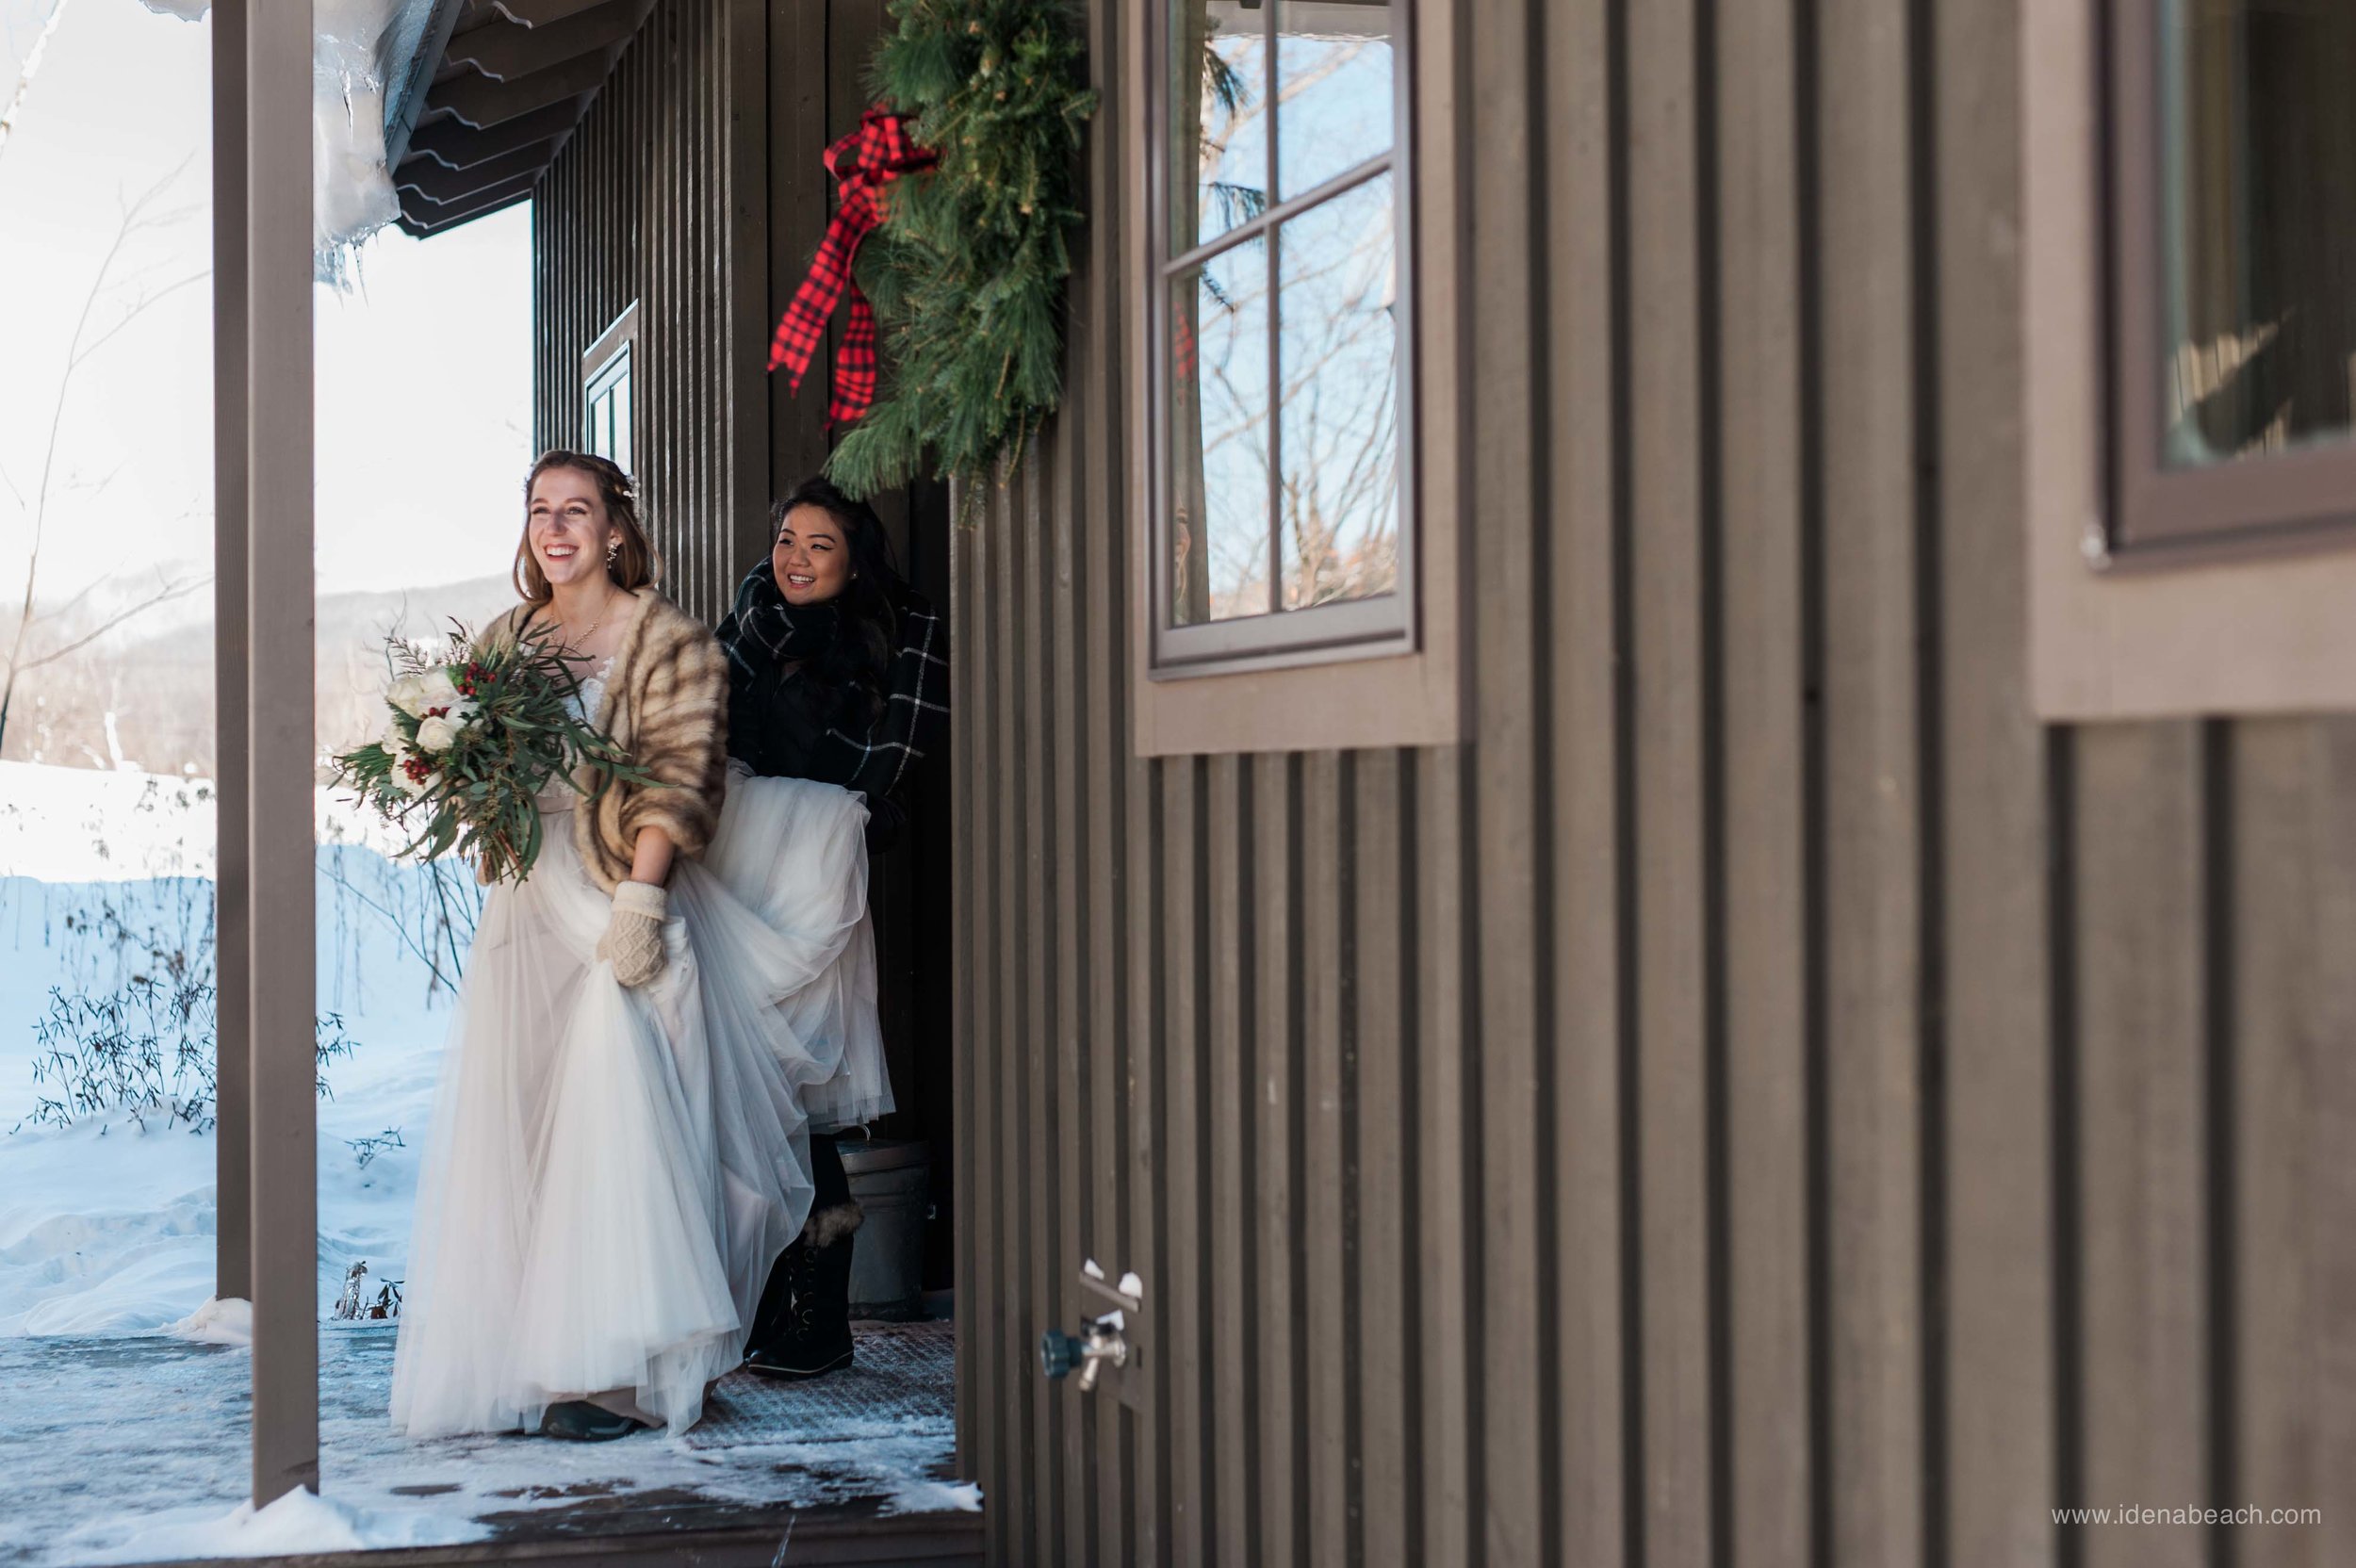  For the first look and before ceremony portraits, these two warm souls had to brave -20F weather and they did it with a big smile on their face 